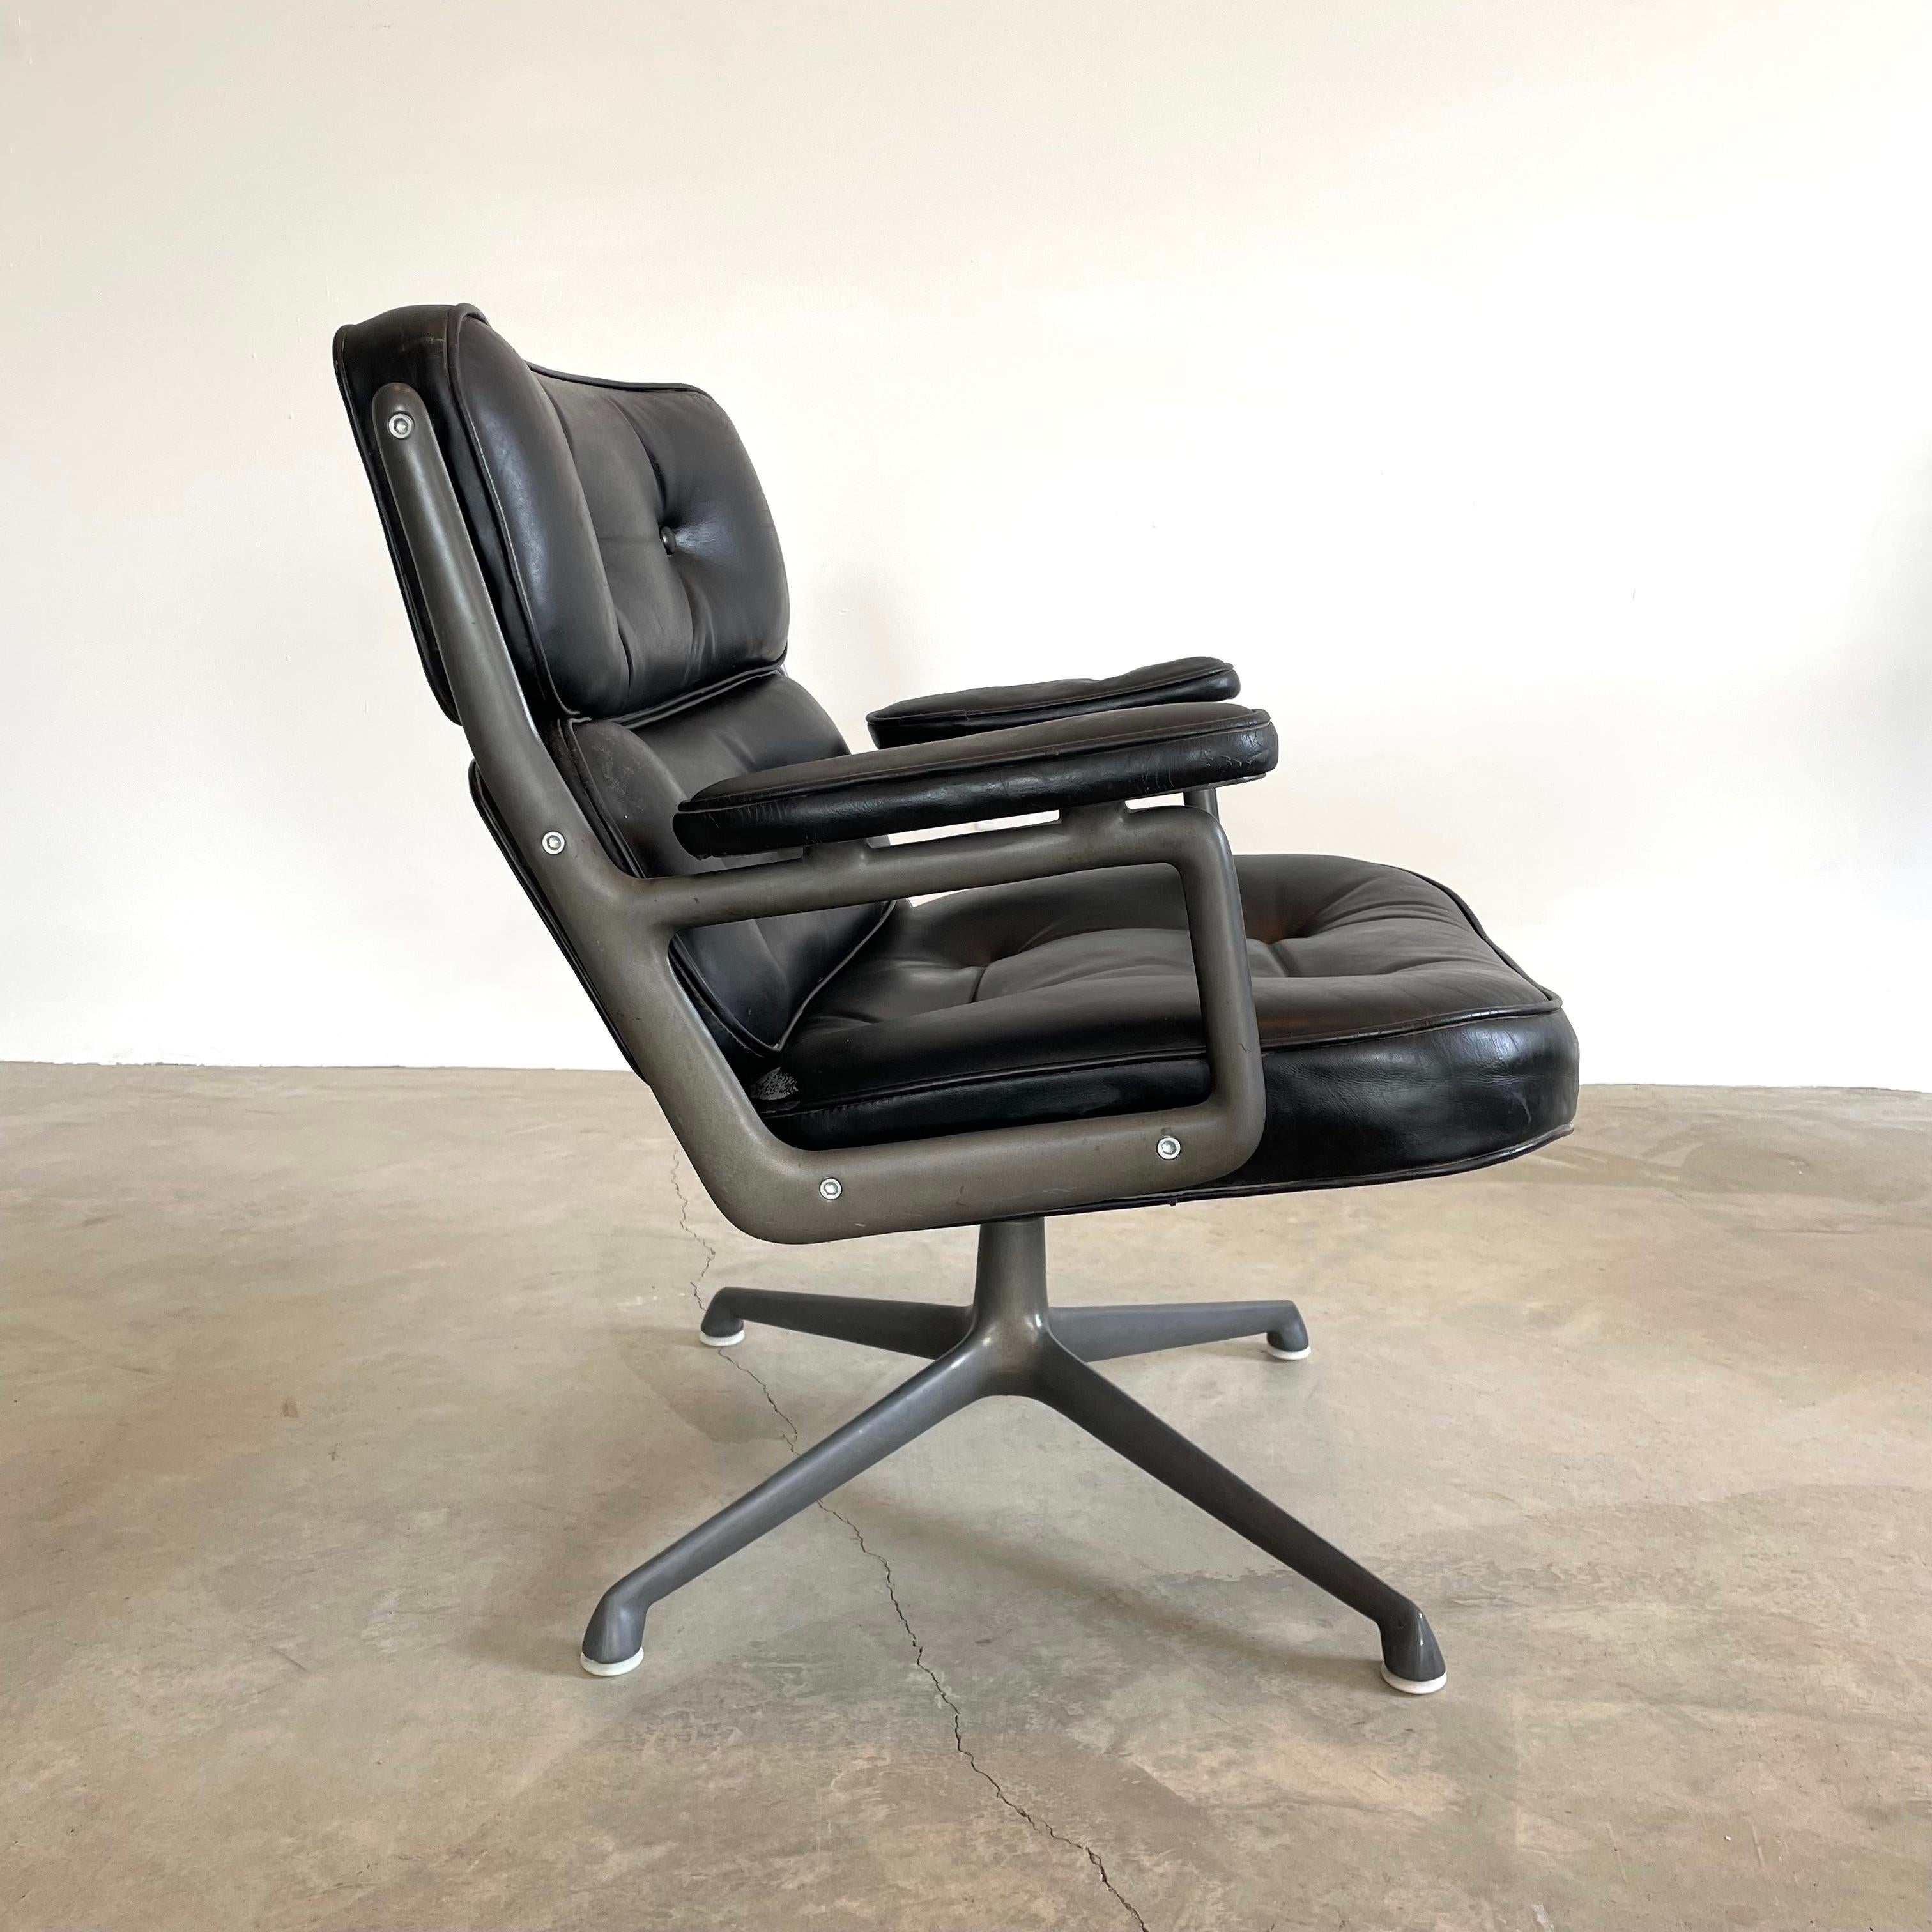 North American Eames Time Life Lobby Lounge Chair in Black Leather for Herman Miller, 1980s USA For Sale